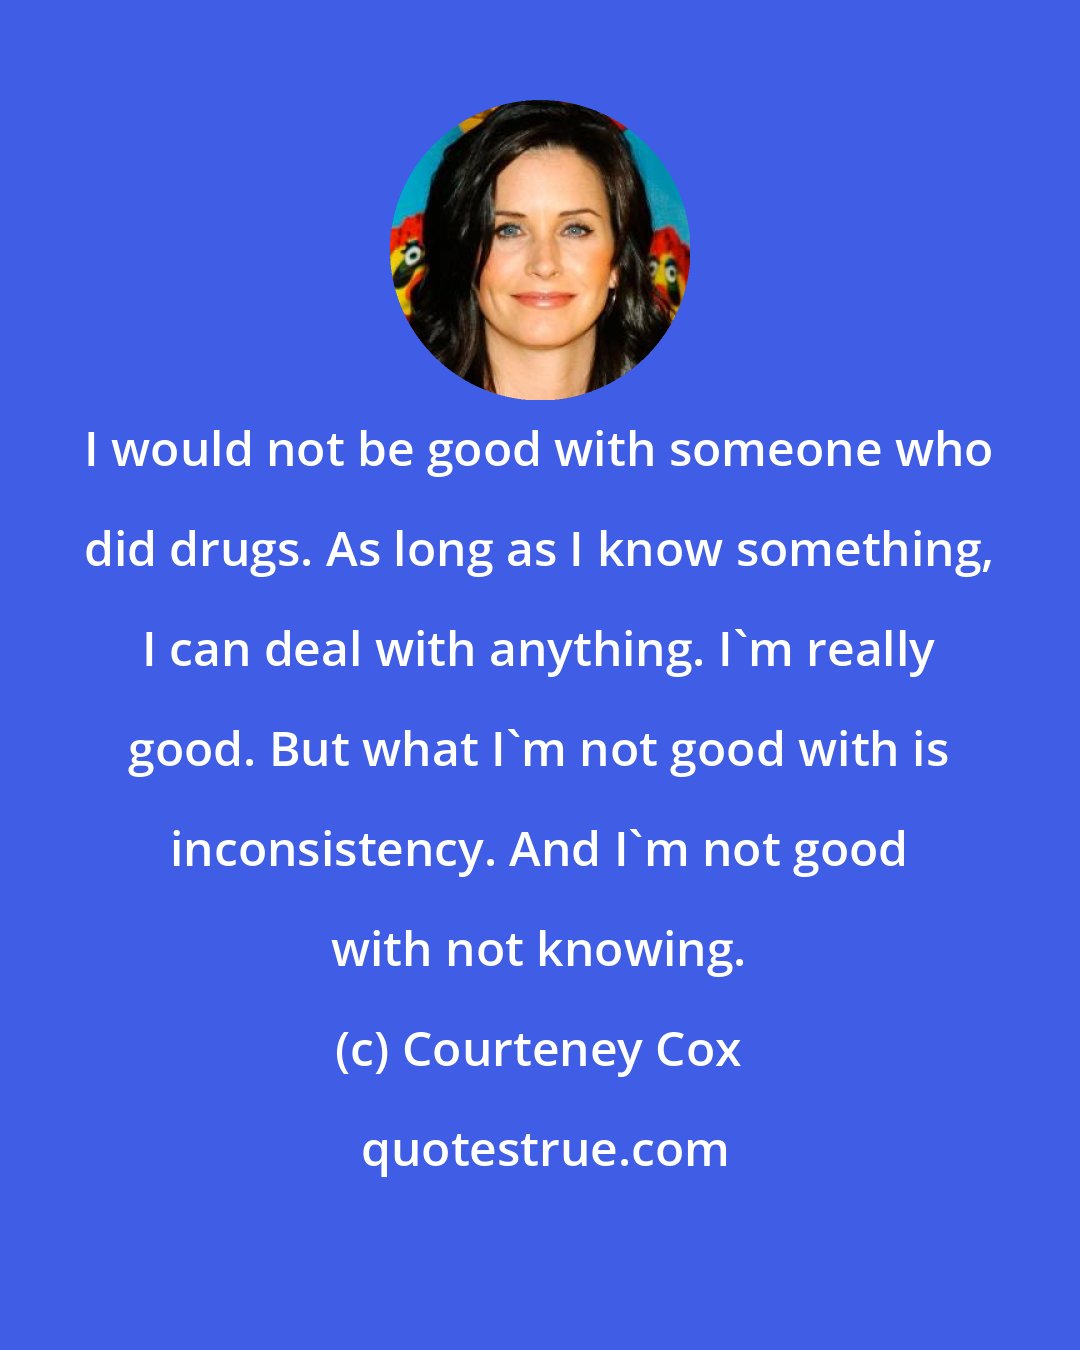 Courteney Cox: I would not be good with someone who did drugs. As long as I know something, I can deal with anything. I'm really good. But what I'm not good with is inconsistency. And I'm not good with not knowing.